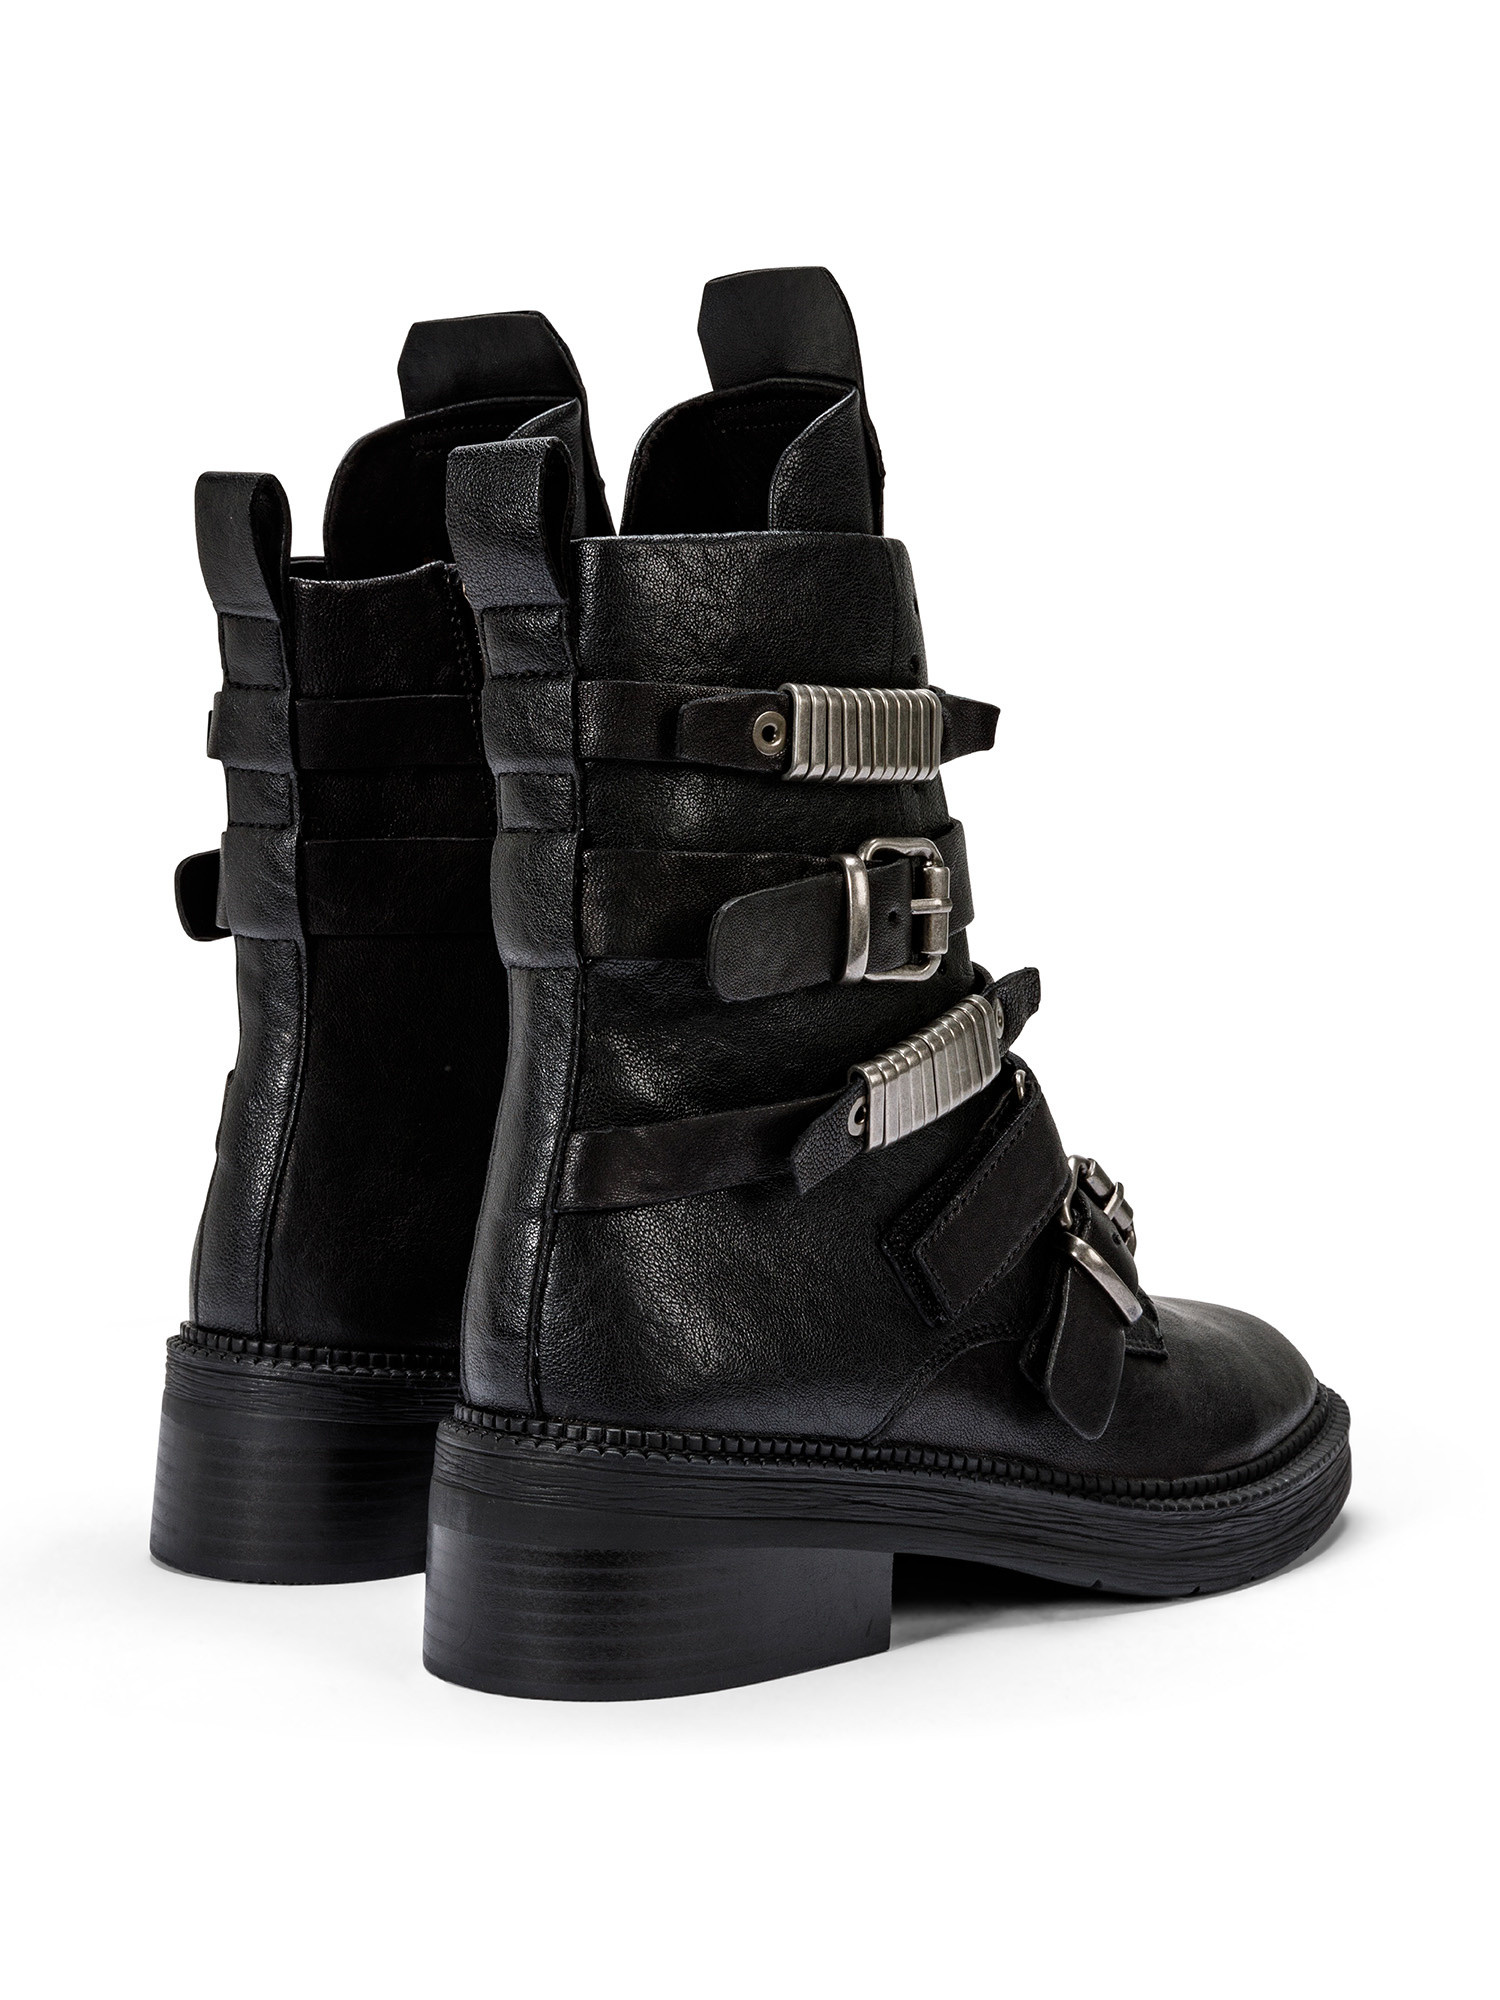 DKNY - Lace up ankle boots, Black, large image number 2